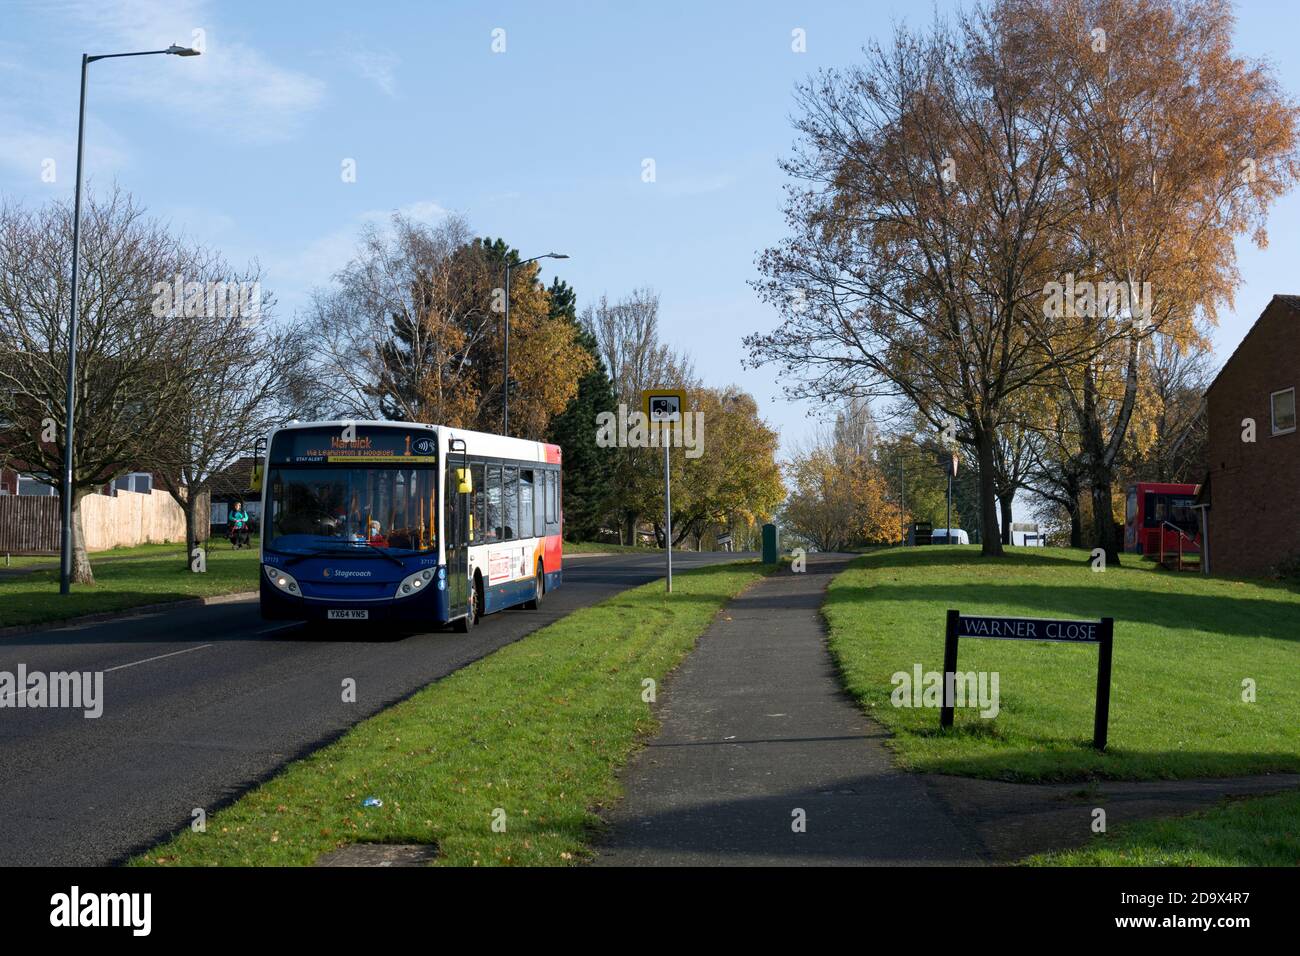 A Stagecoach local bus service in autumn, Woodloes Park Estate, Warwick, Warwickshire, England, UK Stock Photo